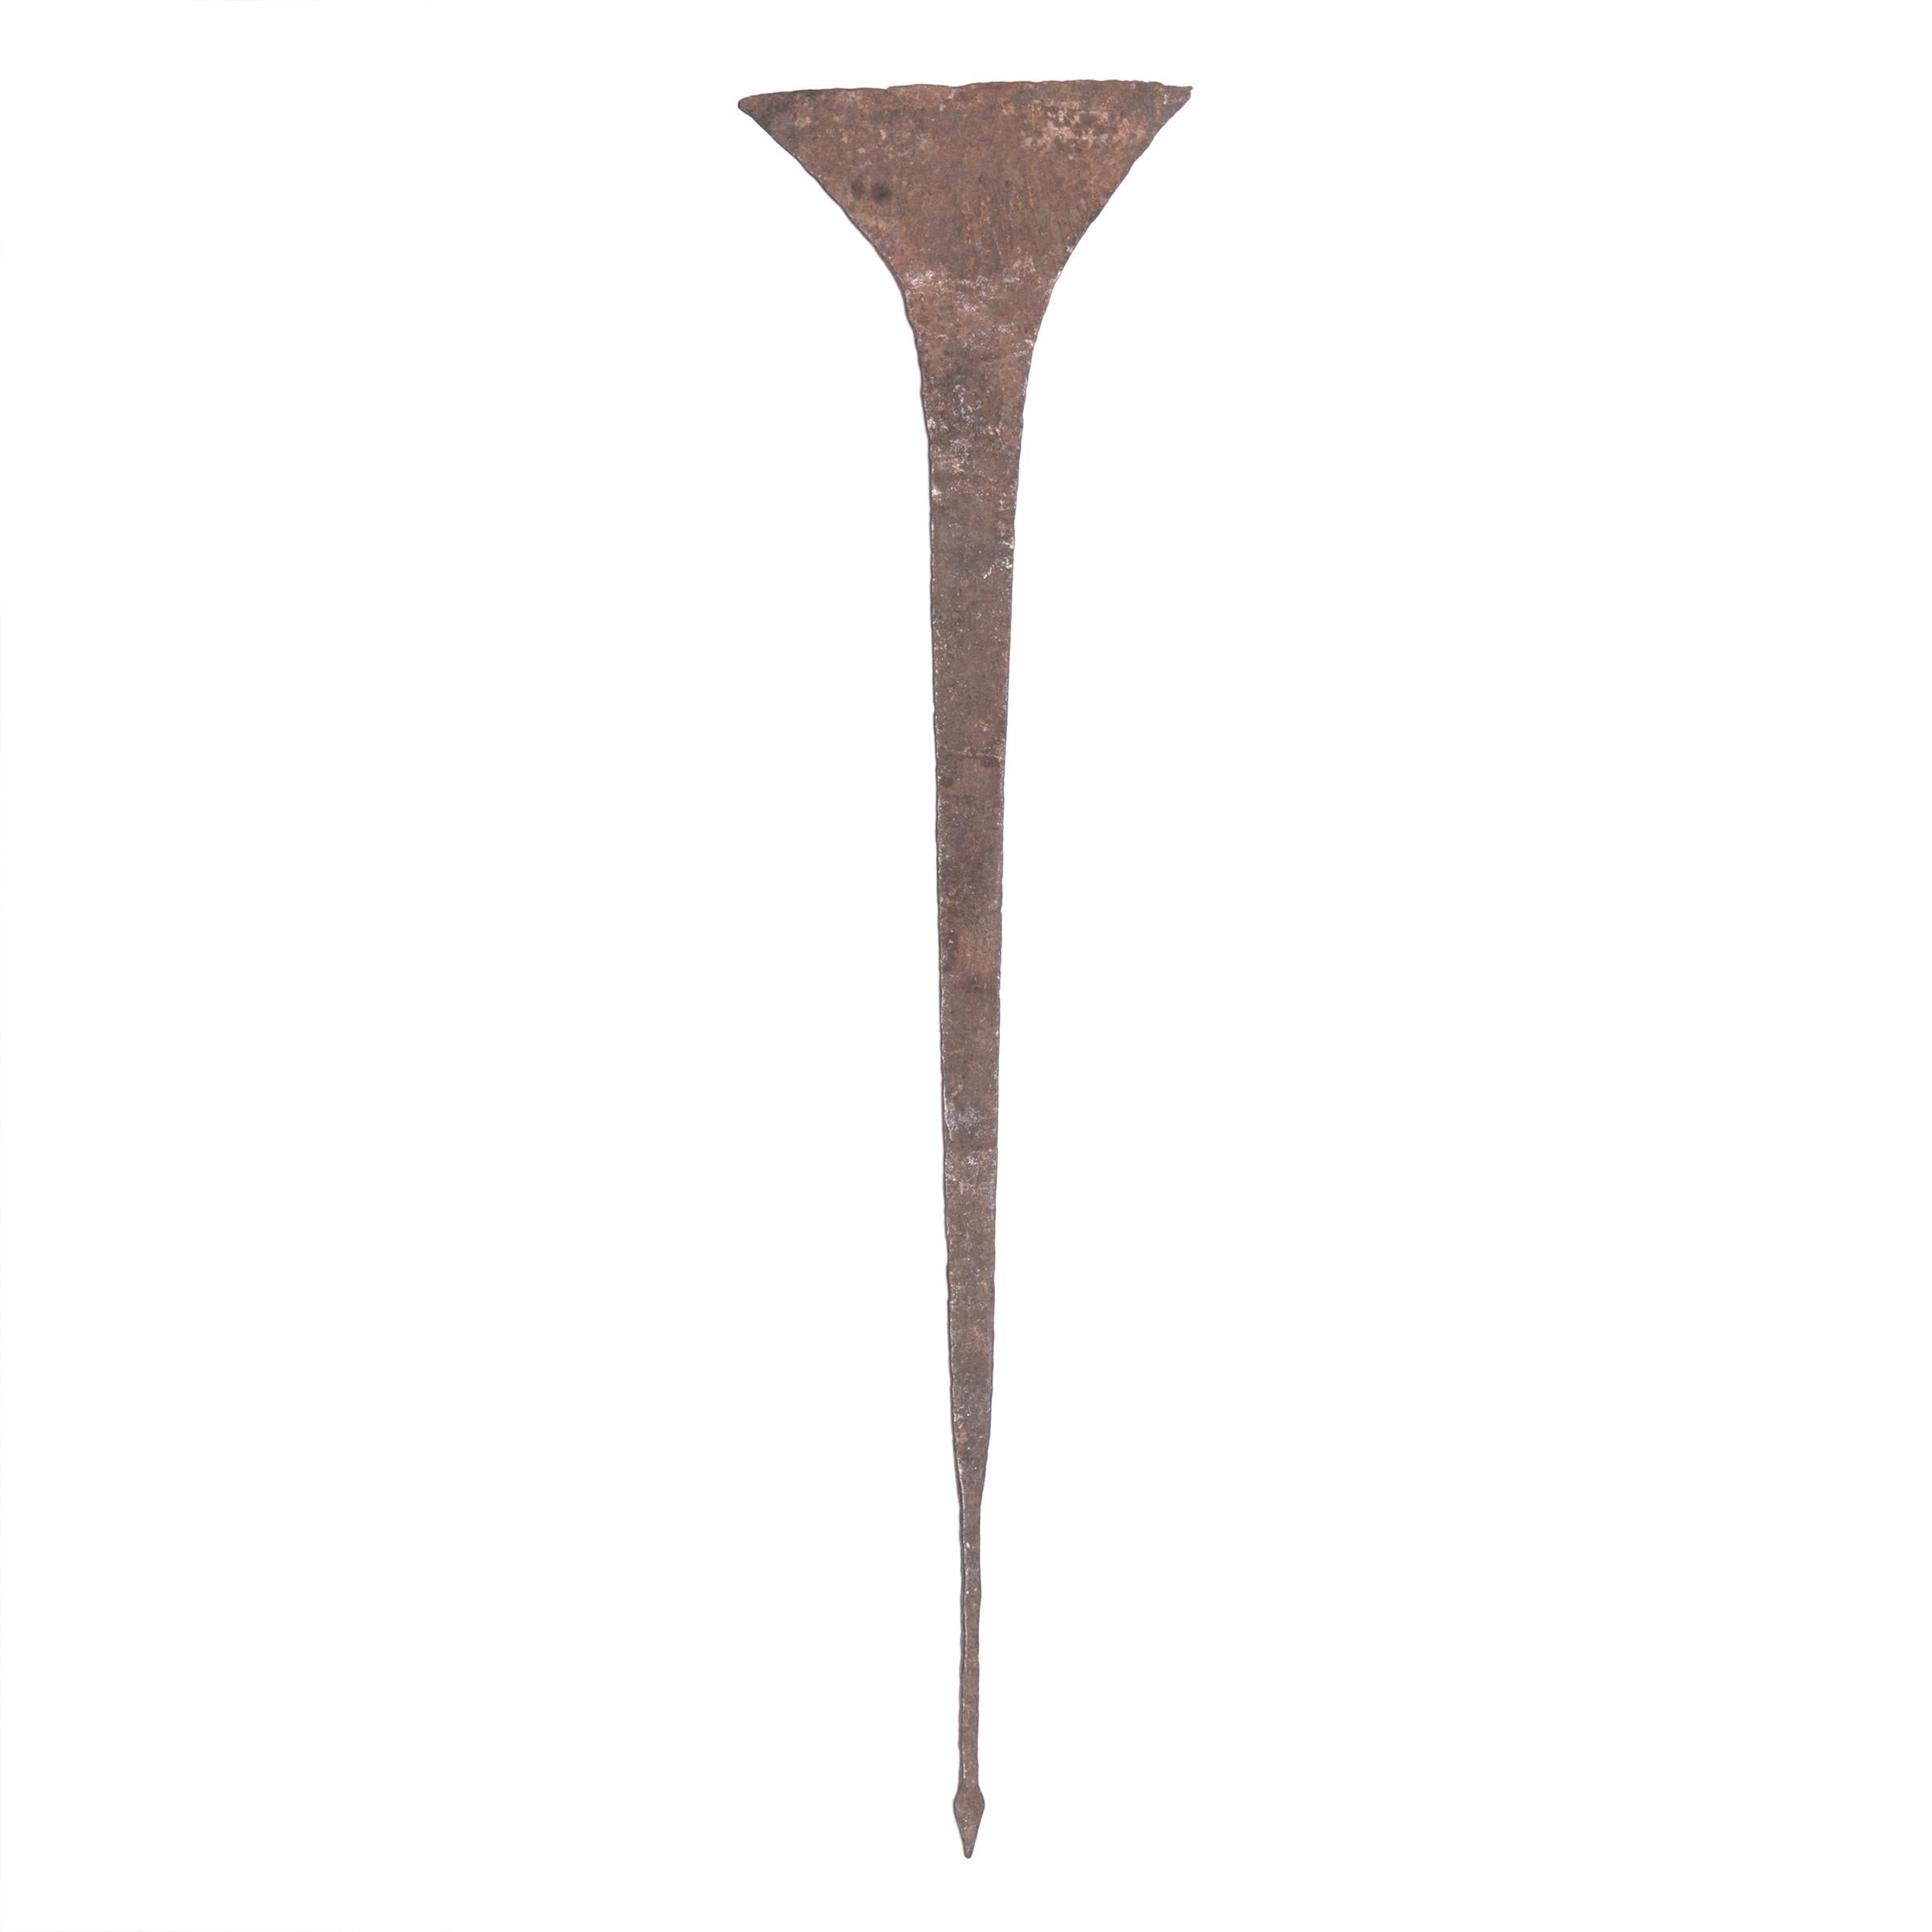 Flaring at the top to suggest a hoe, these elongated sculptural objects were used among the Idoma People of Nigeria as a form of currency. Forged from iron and hammered with horizontal markings to accentuate their tapered shape, the objects are